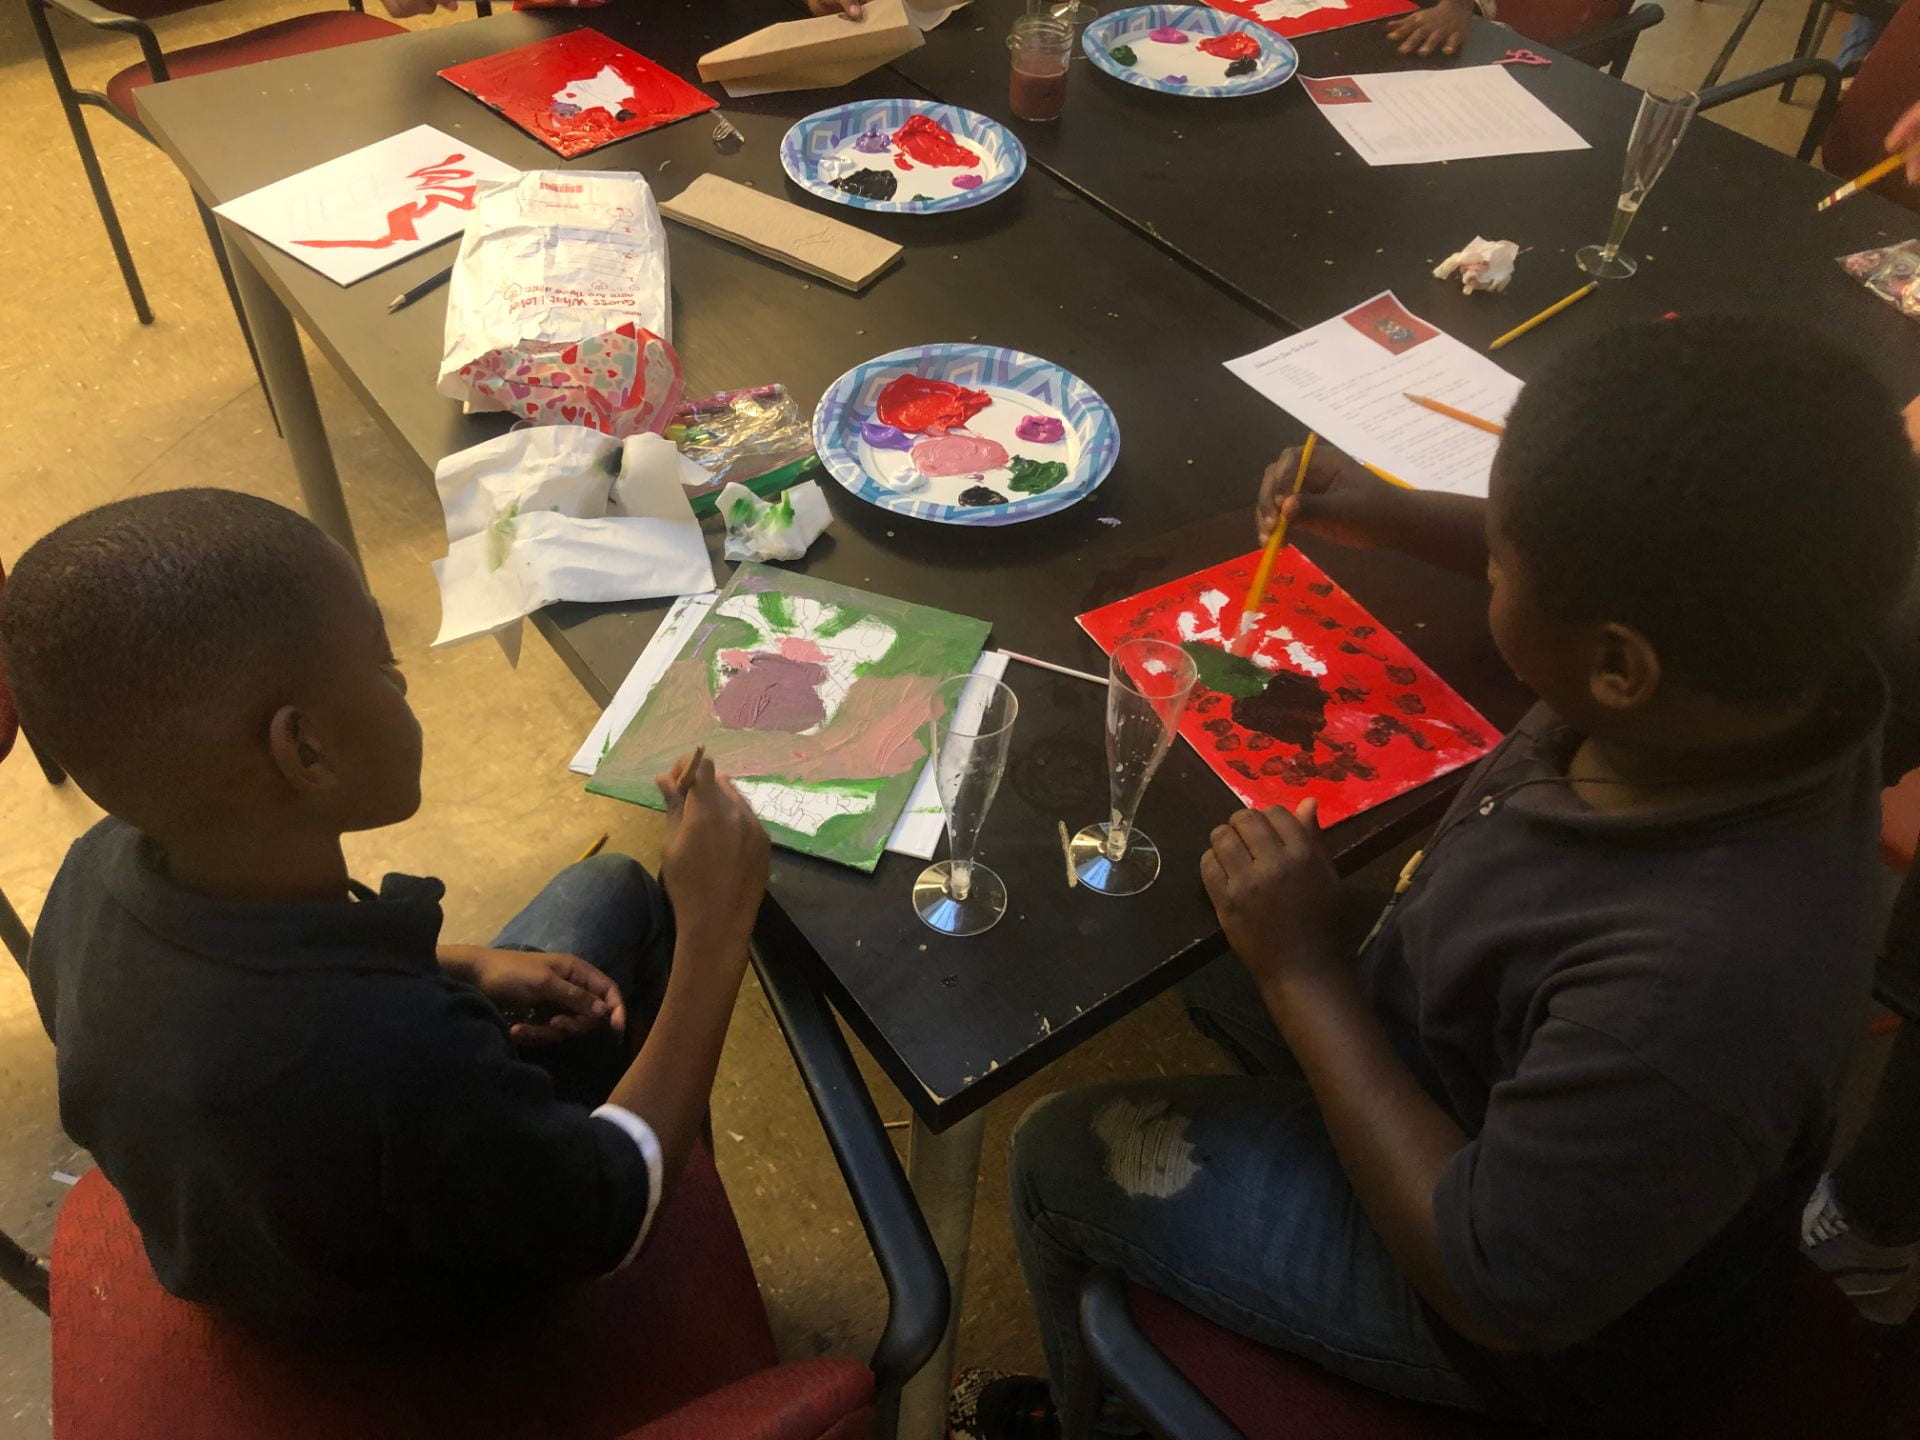 Children learning to Paint